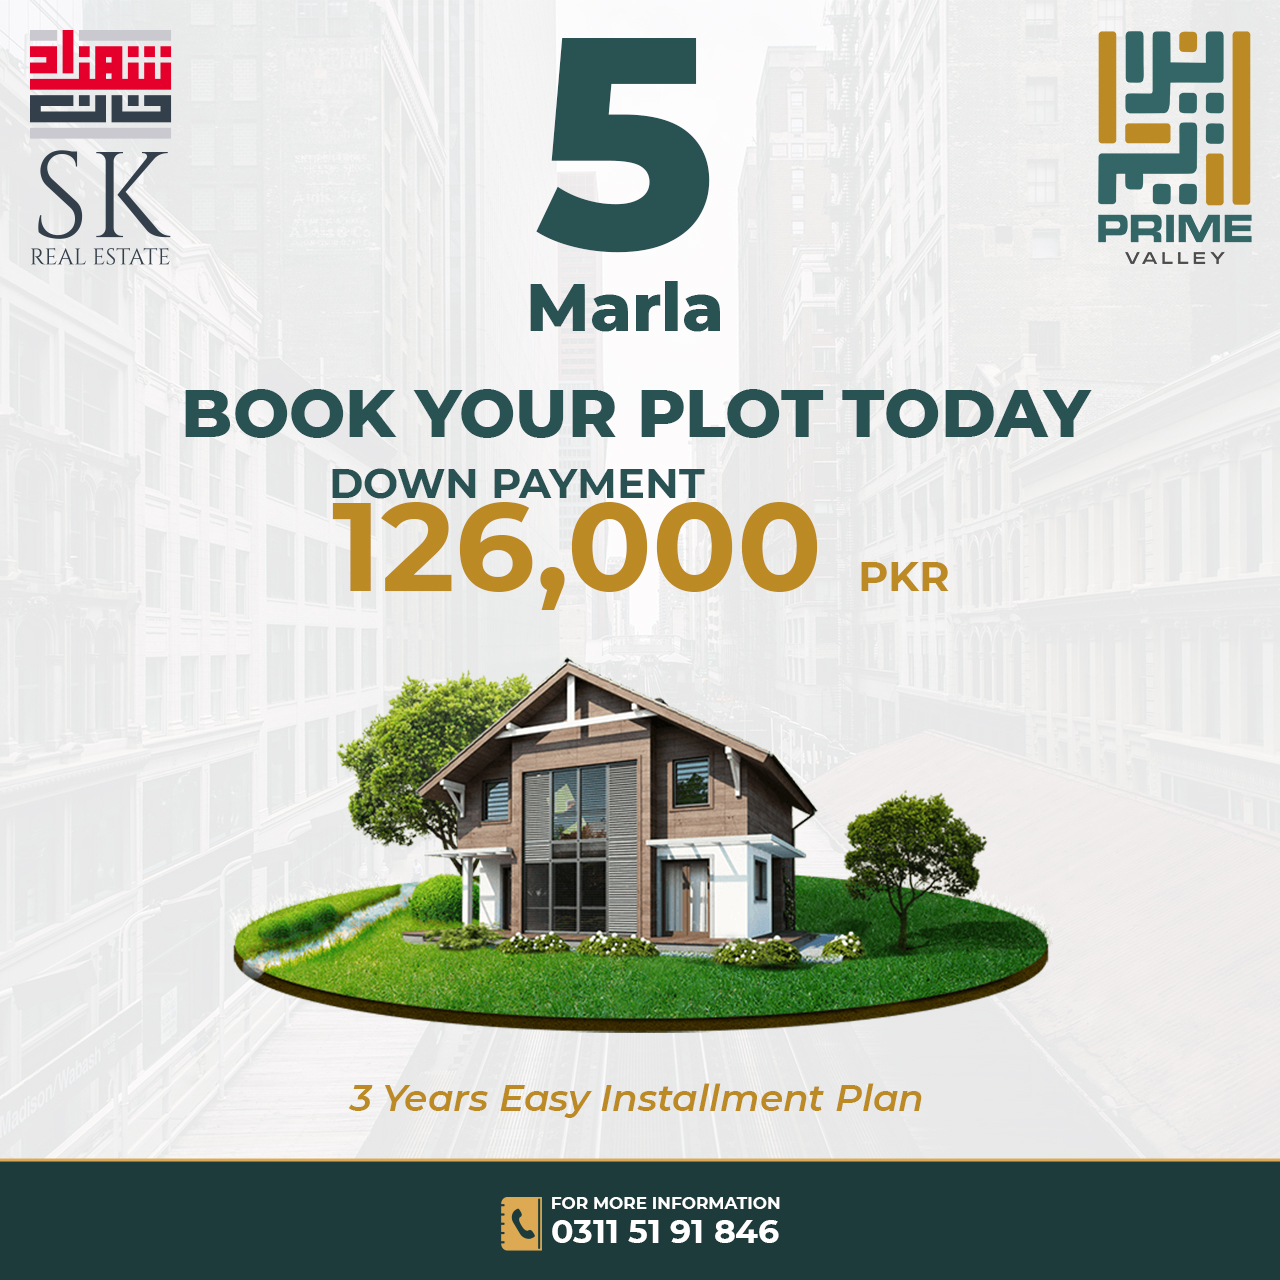 5 marla Residential Plots for Sale - Prime Valley Islamabad